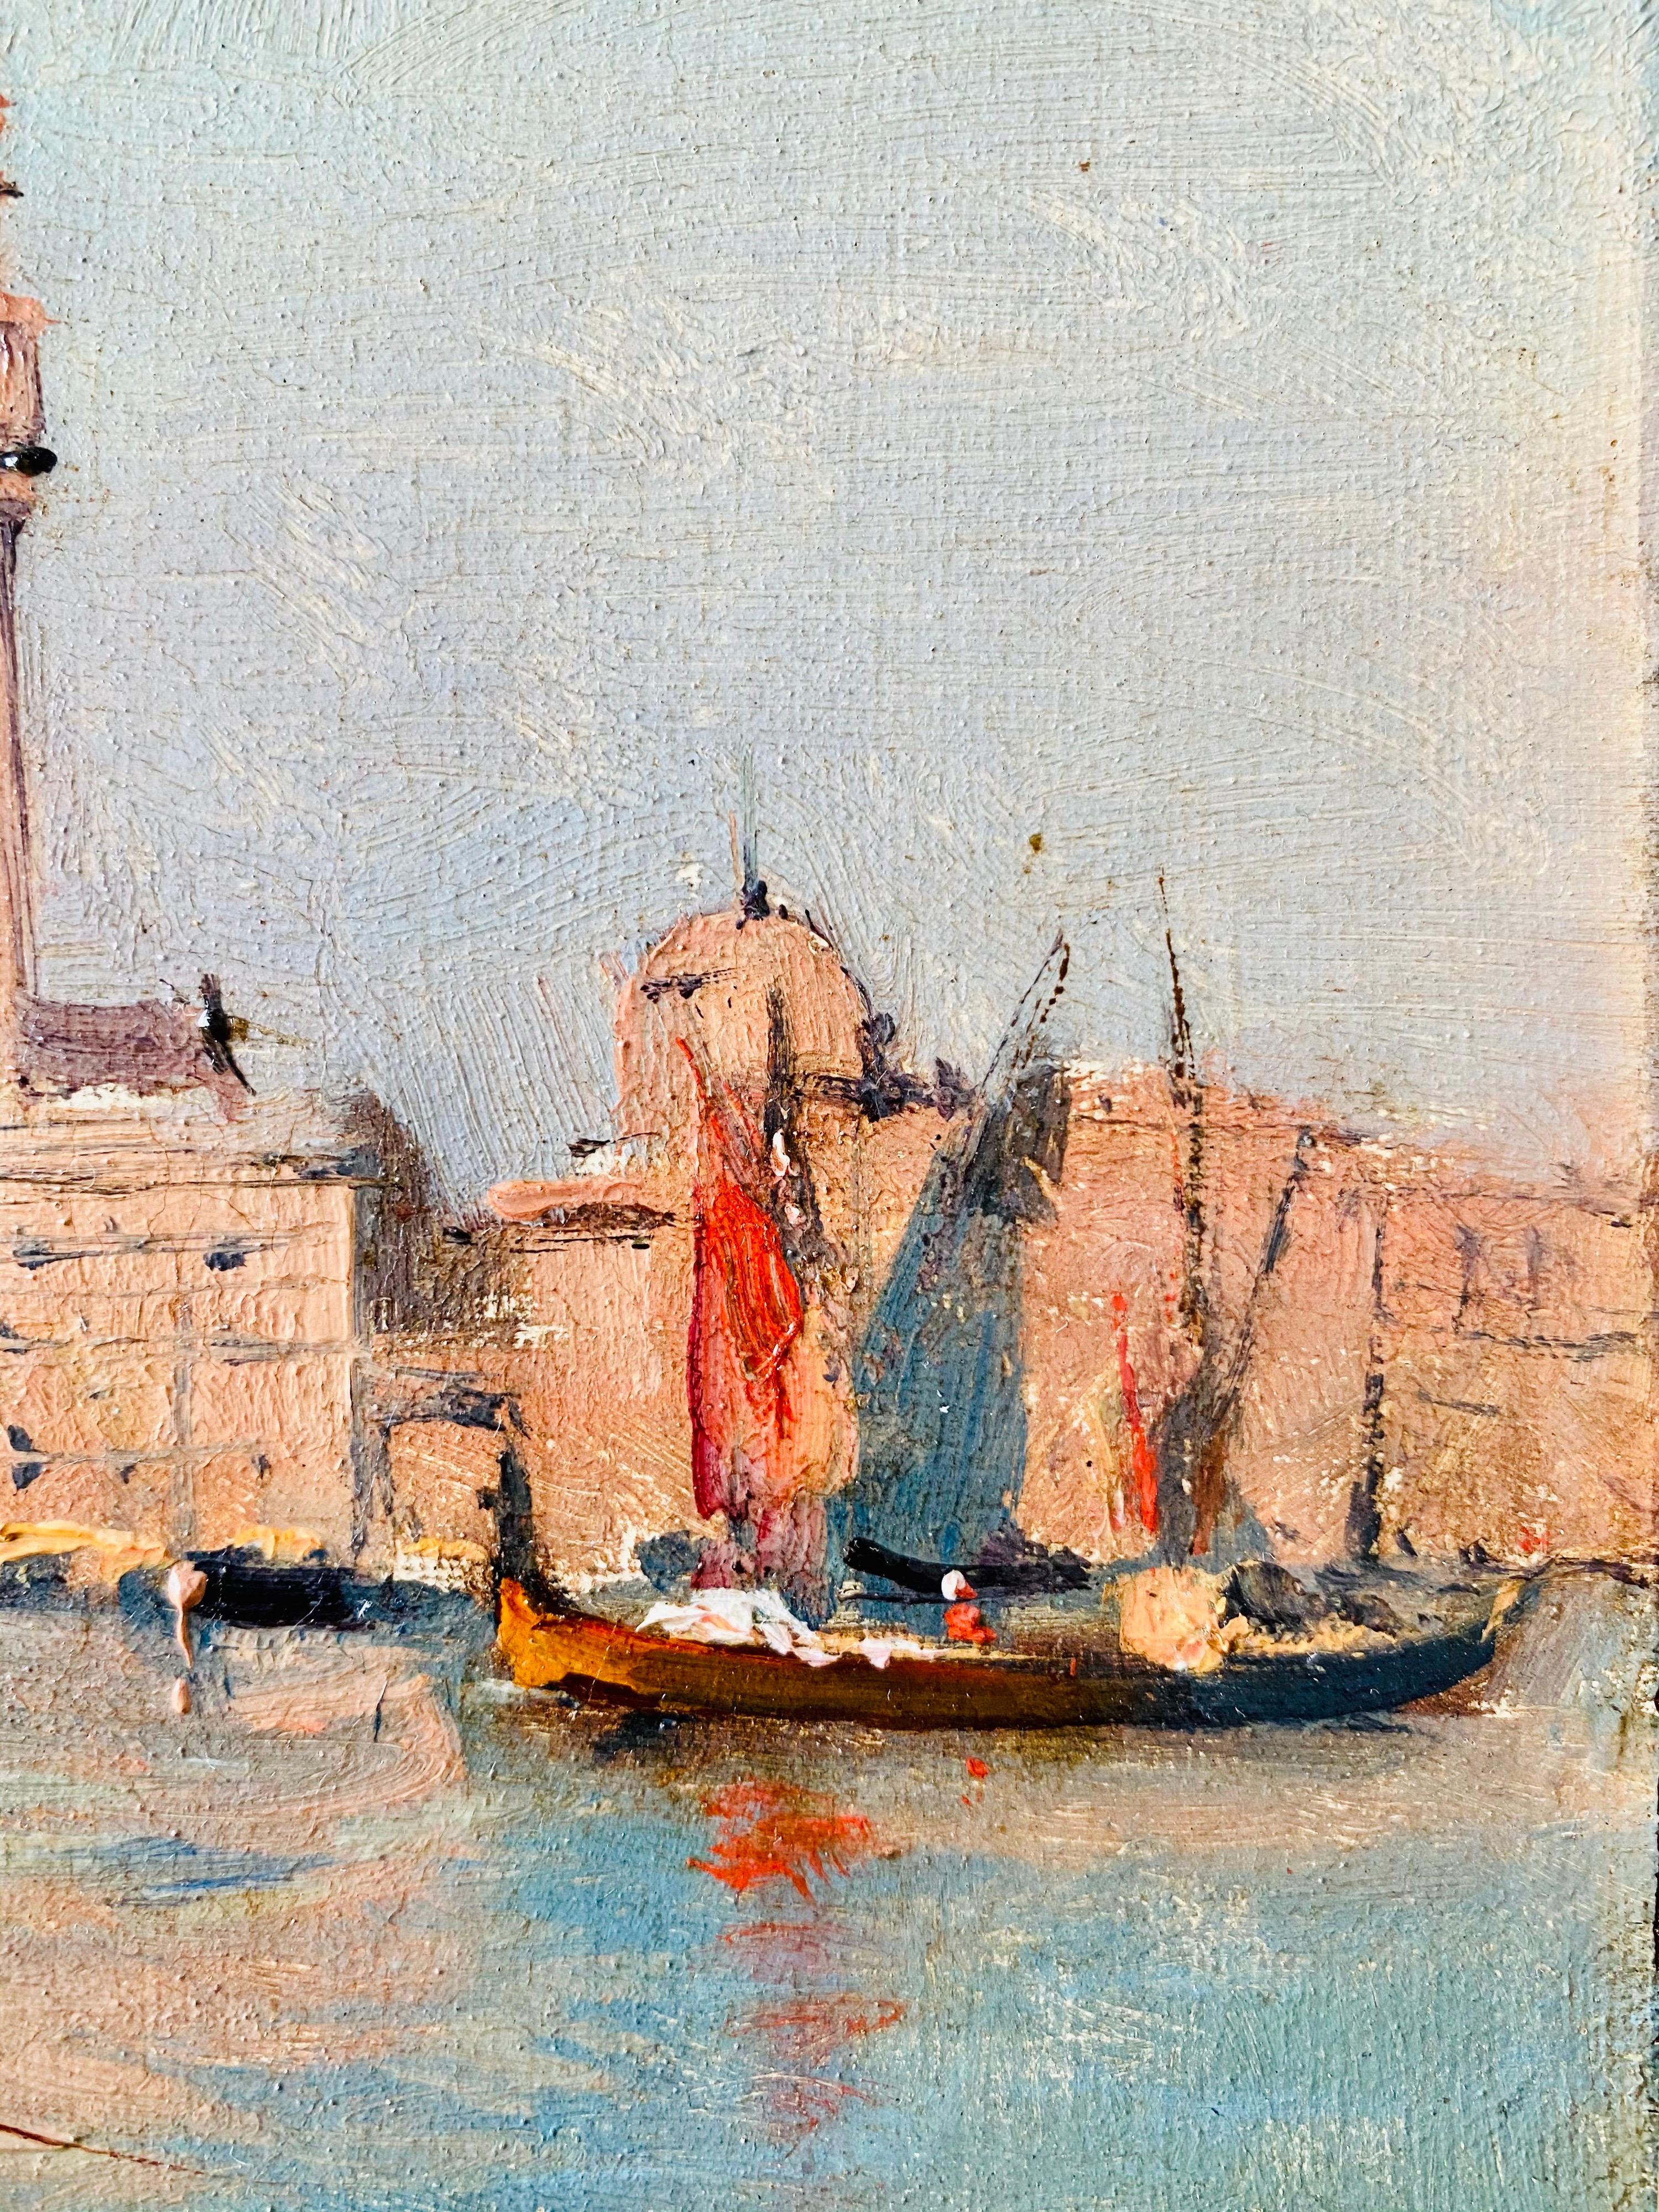 19th century French impressionist painting - View of Venice - Cityscape Boat 1